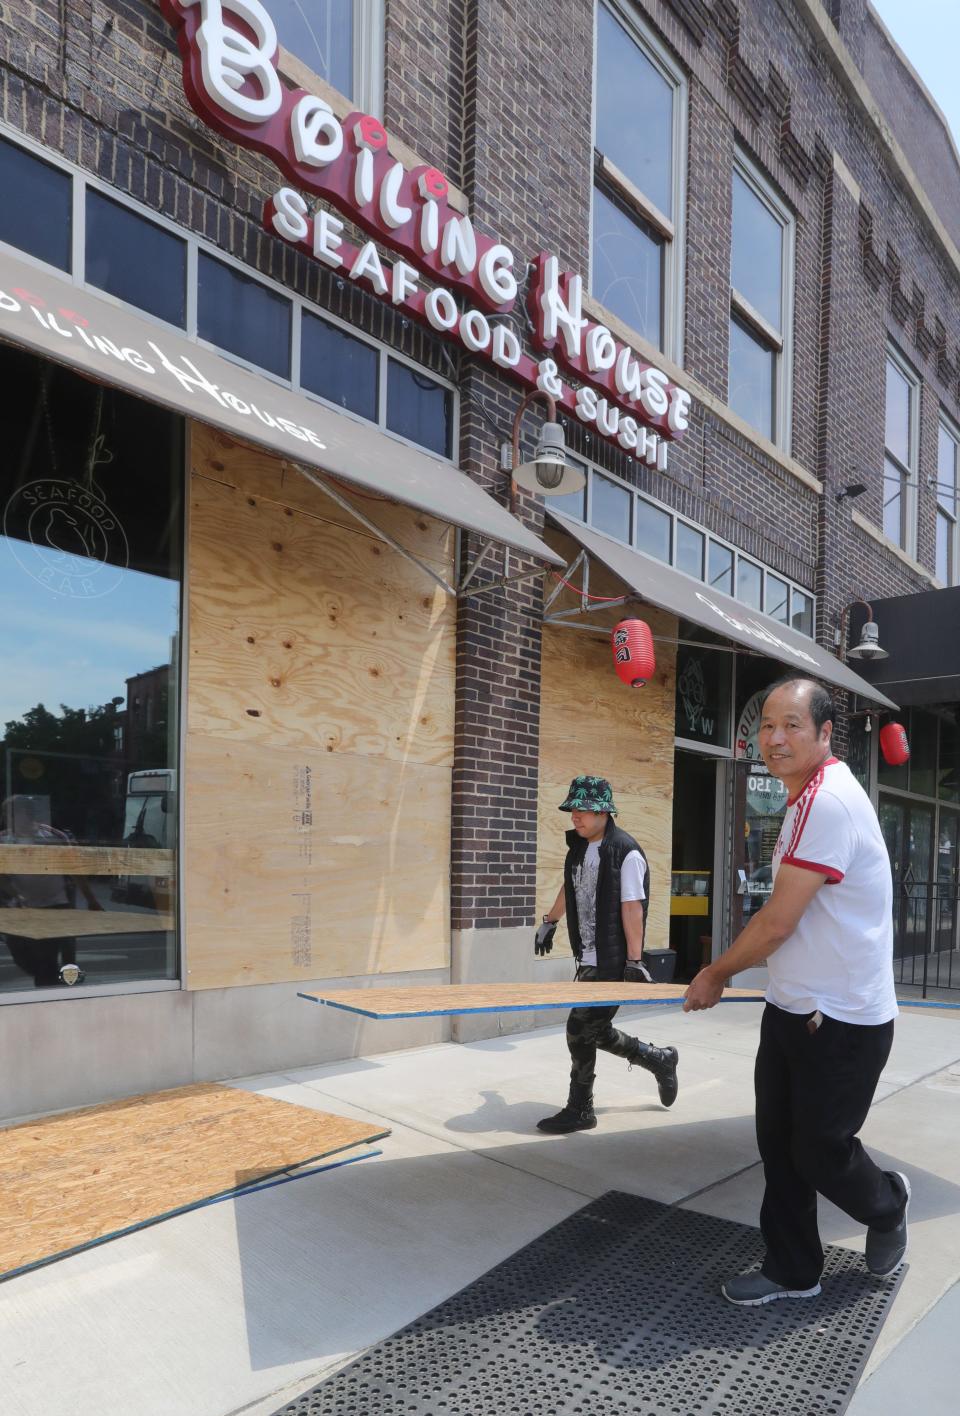 Workers carry plywood Monday to board up the windows of Boiling House in Akron. The restaurant was damaged during unrest downtown Sunday night.